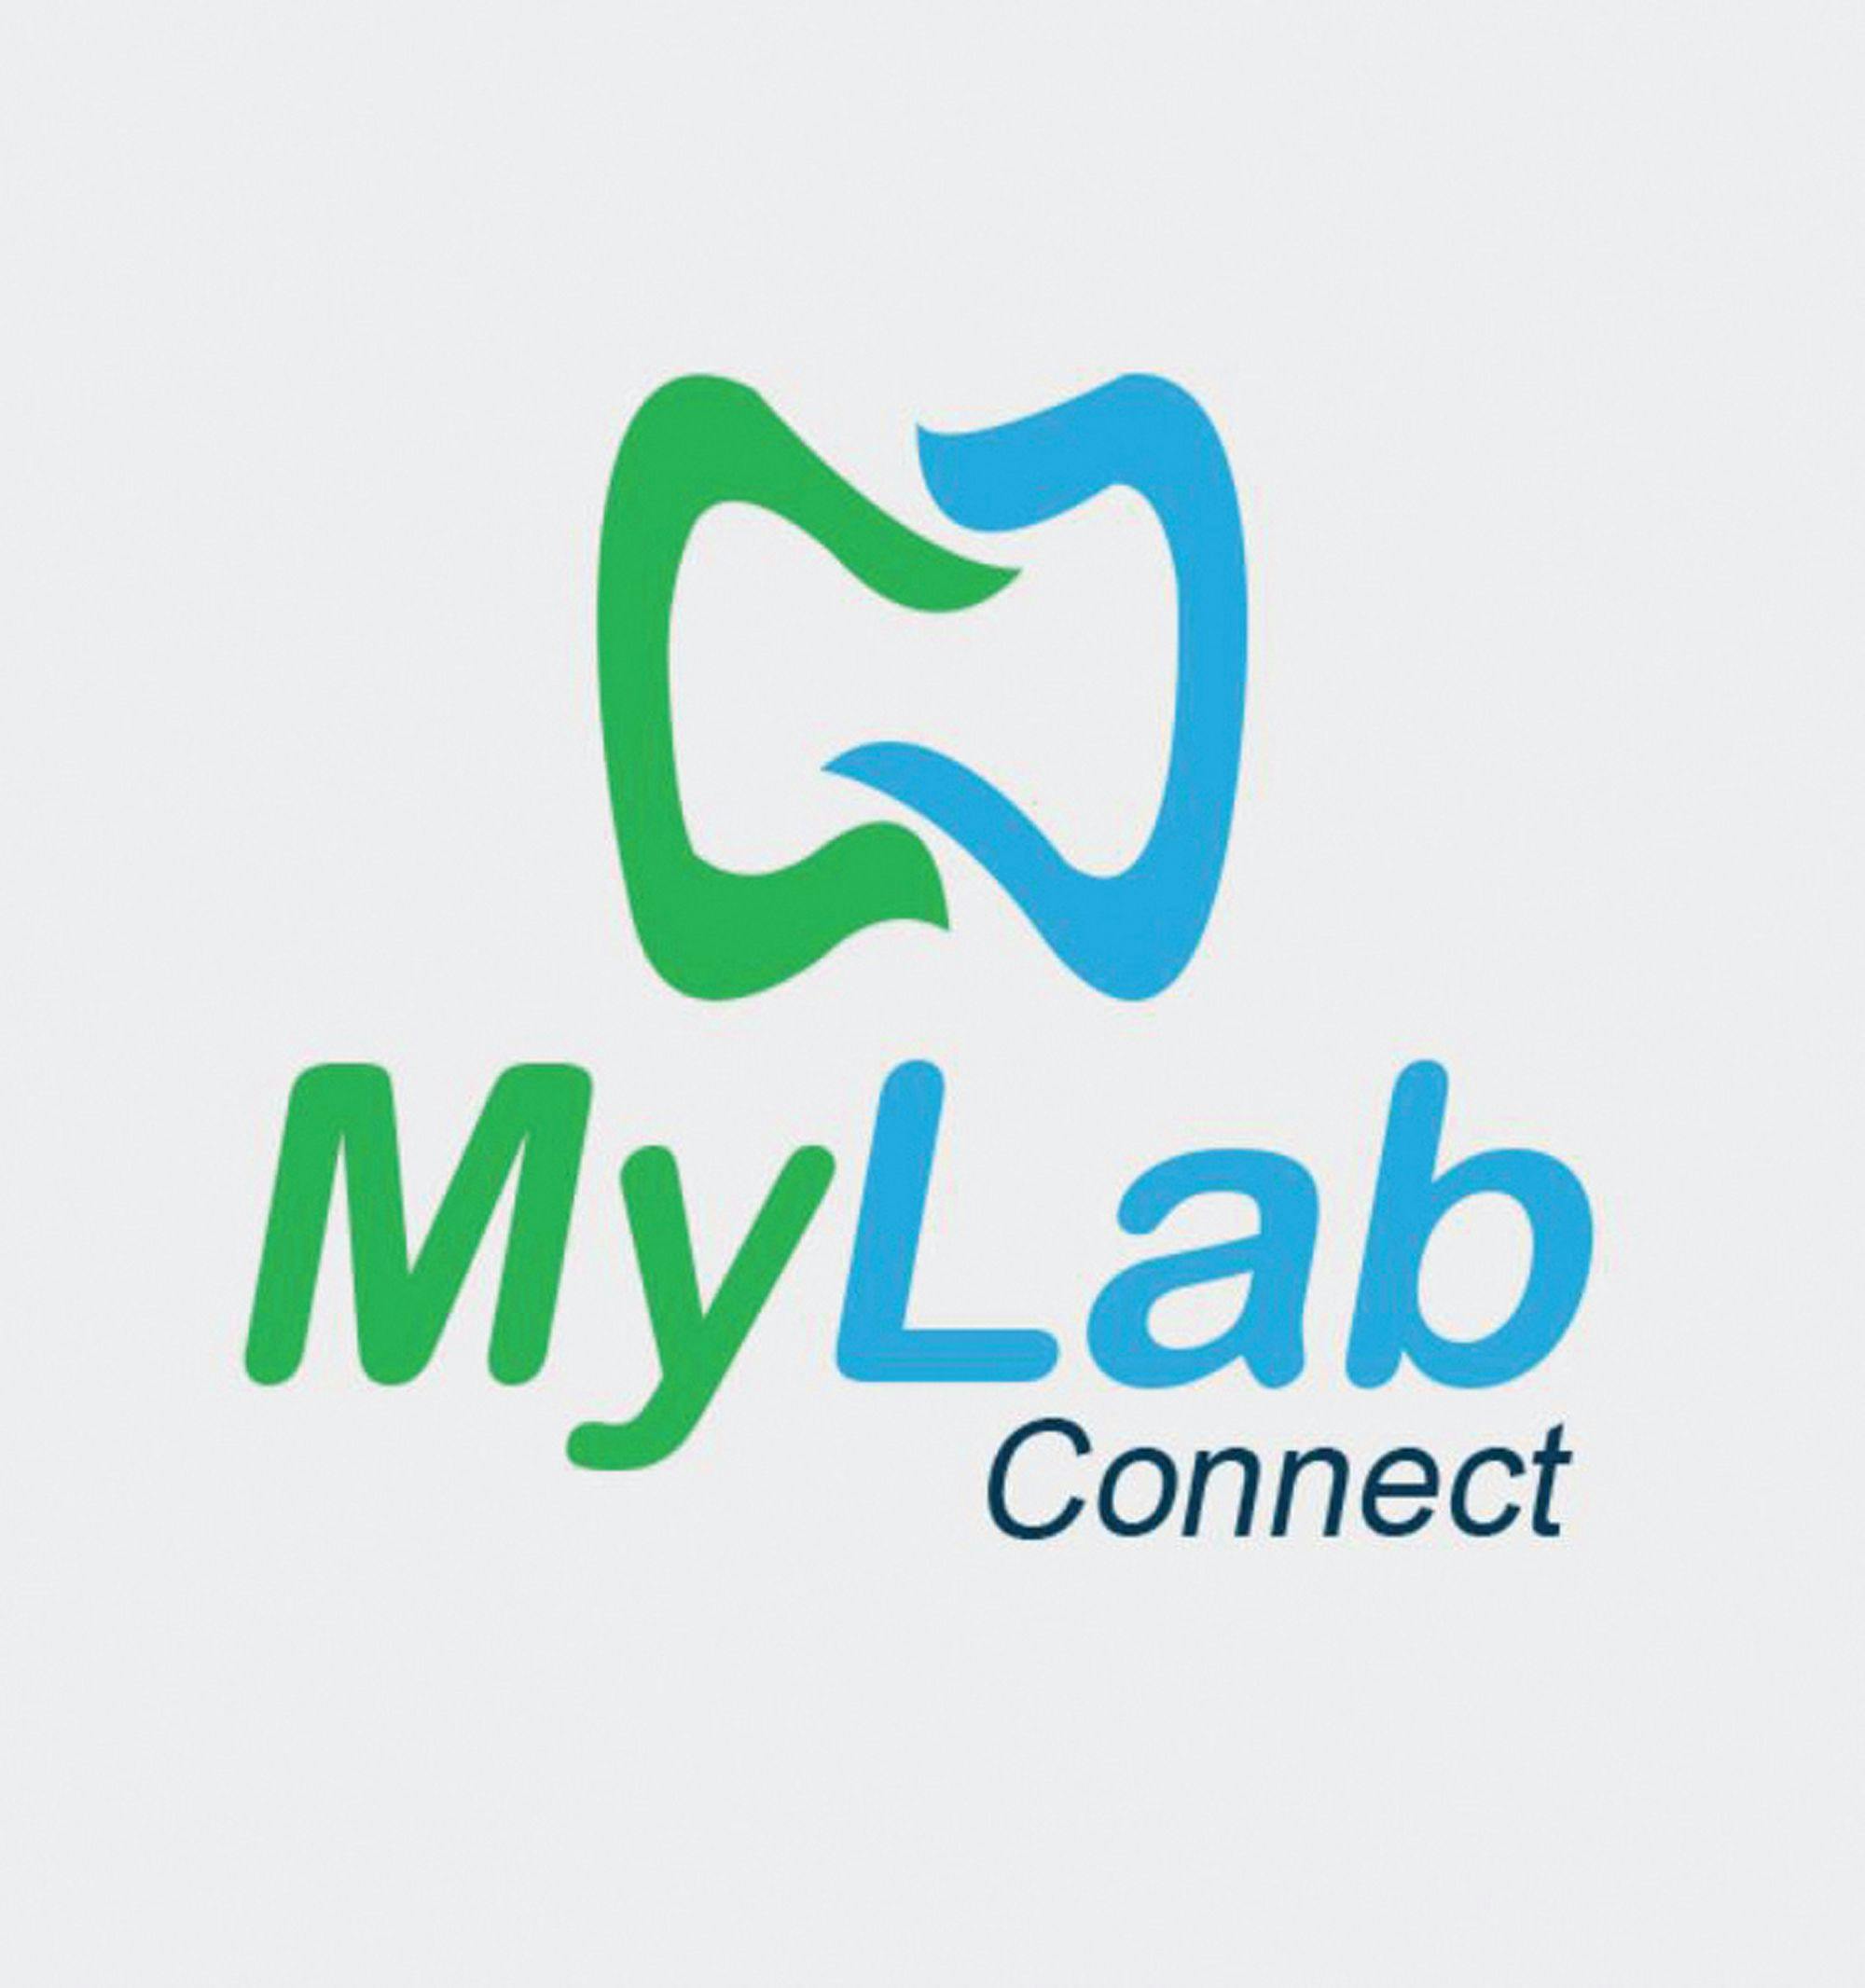 MyLabConnect is a cloud-based software platform that allows solo and DSO practices to manage effective communications with dental labs.